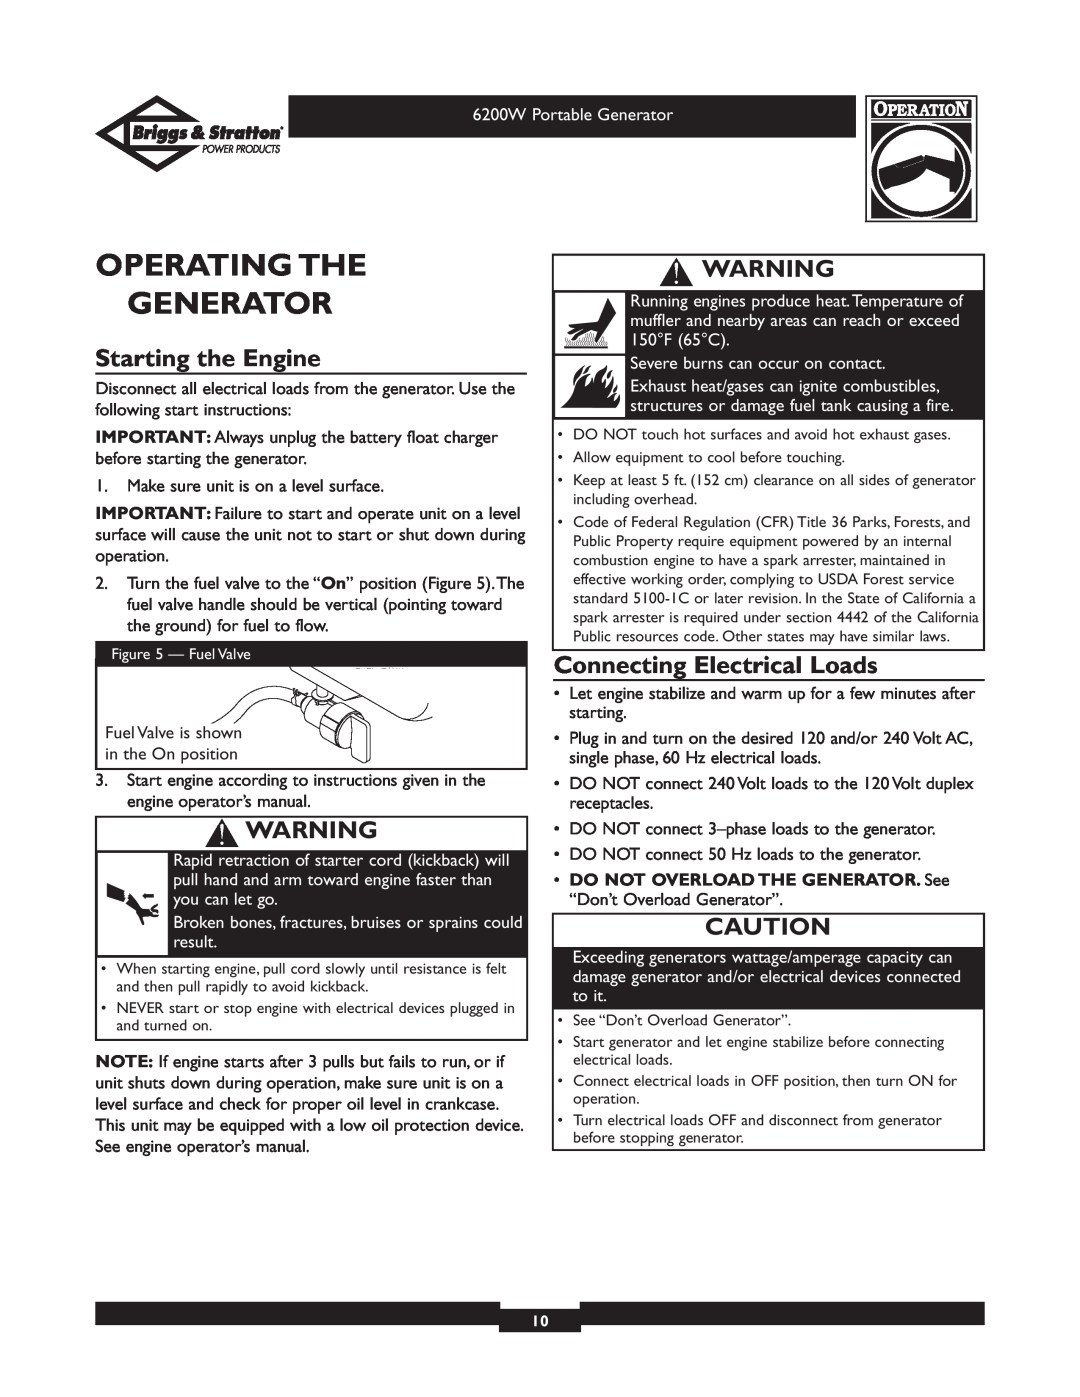 Briggs & Stratton 30211 operating instructions Operating The Generator, Starting the Engine, Connecting Electrical Loads 